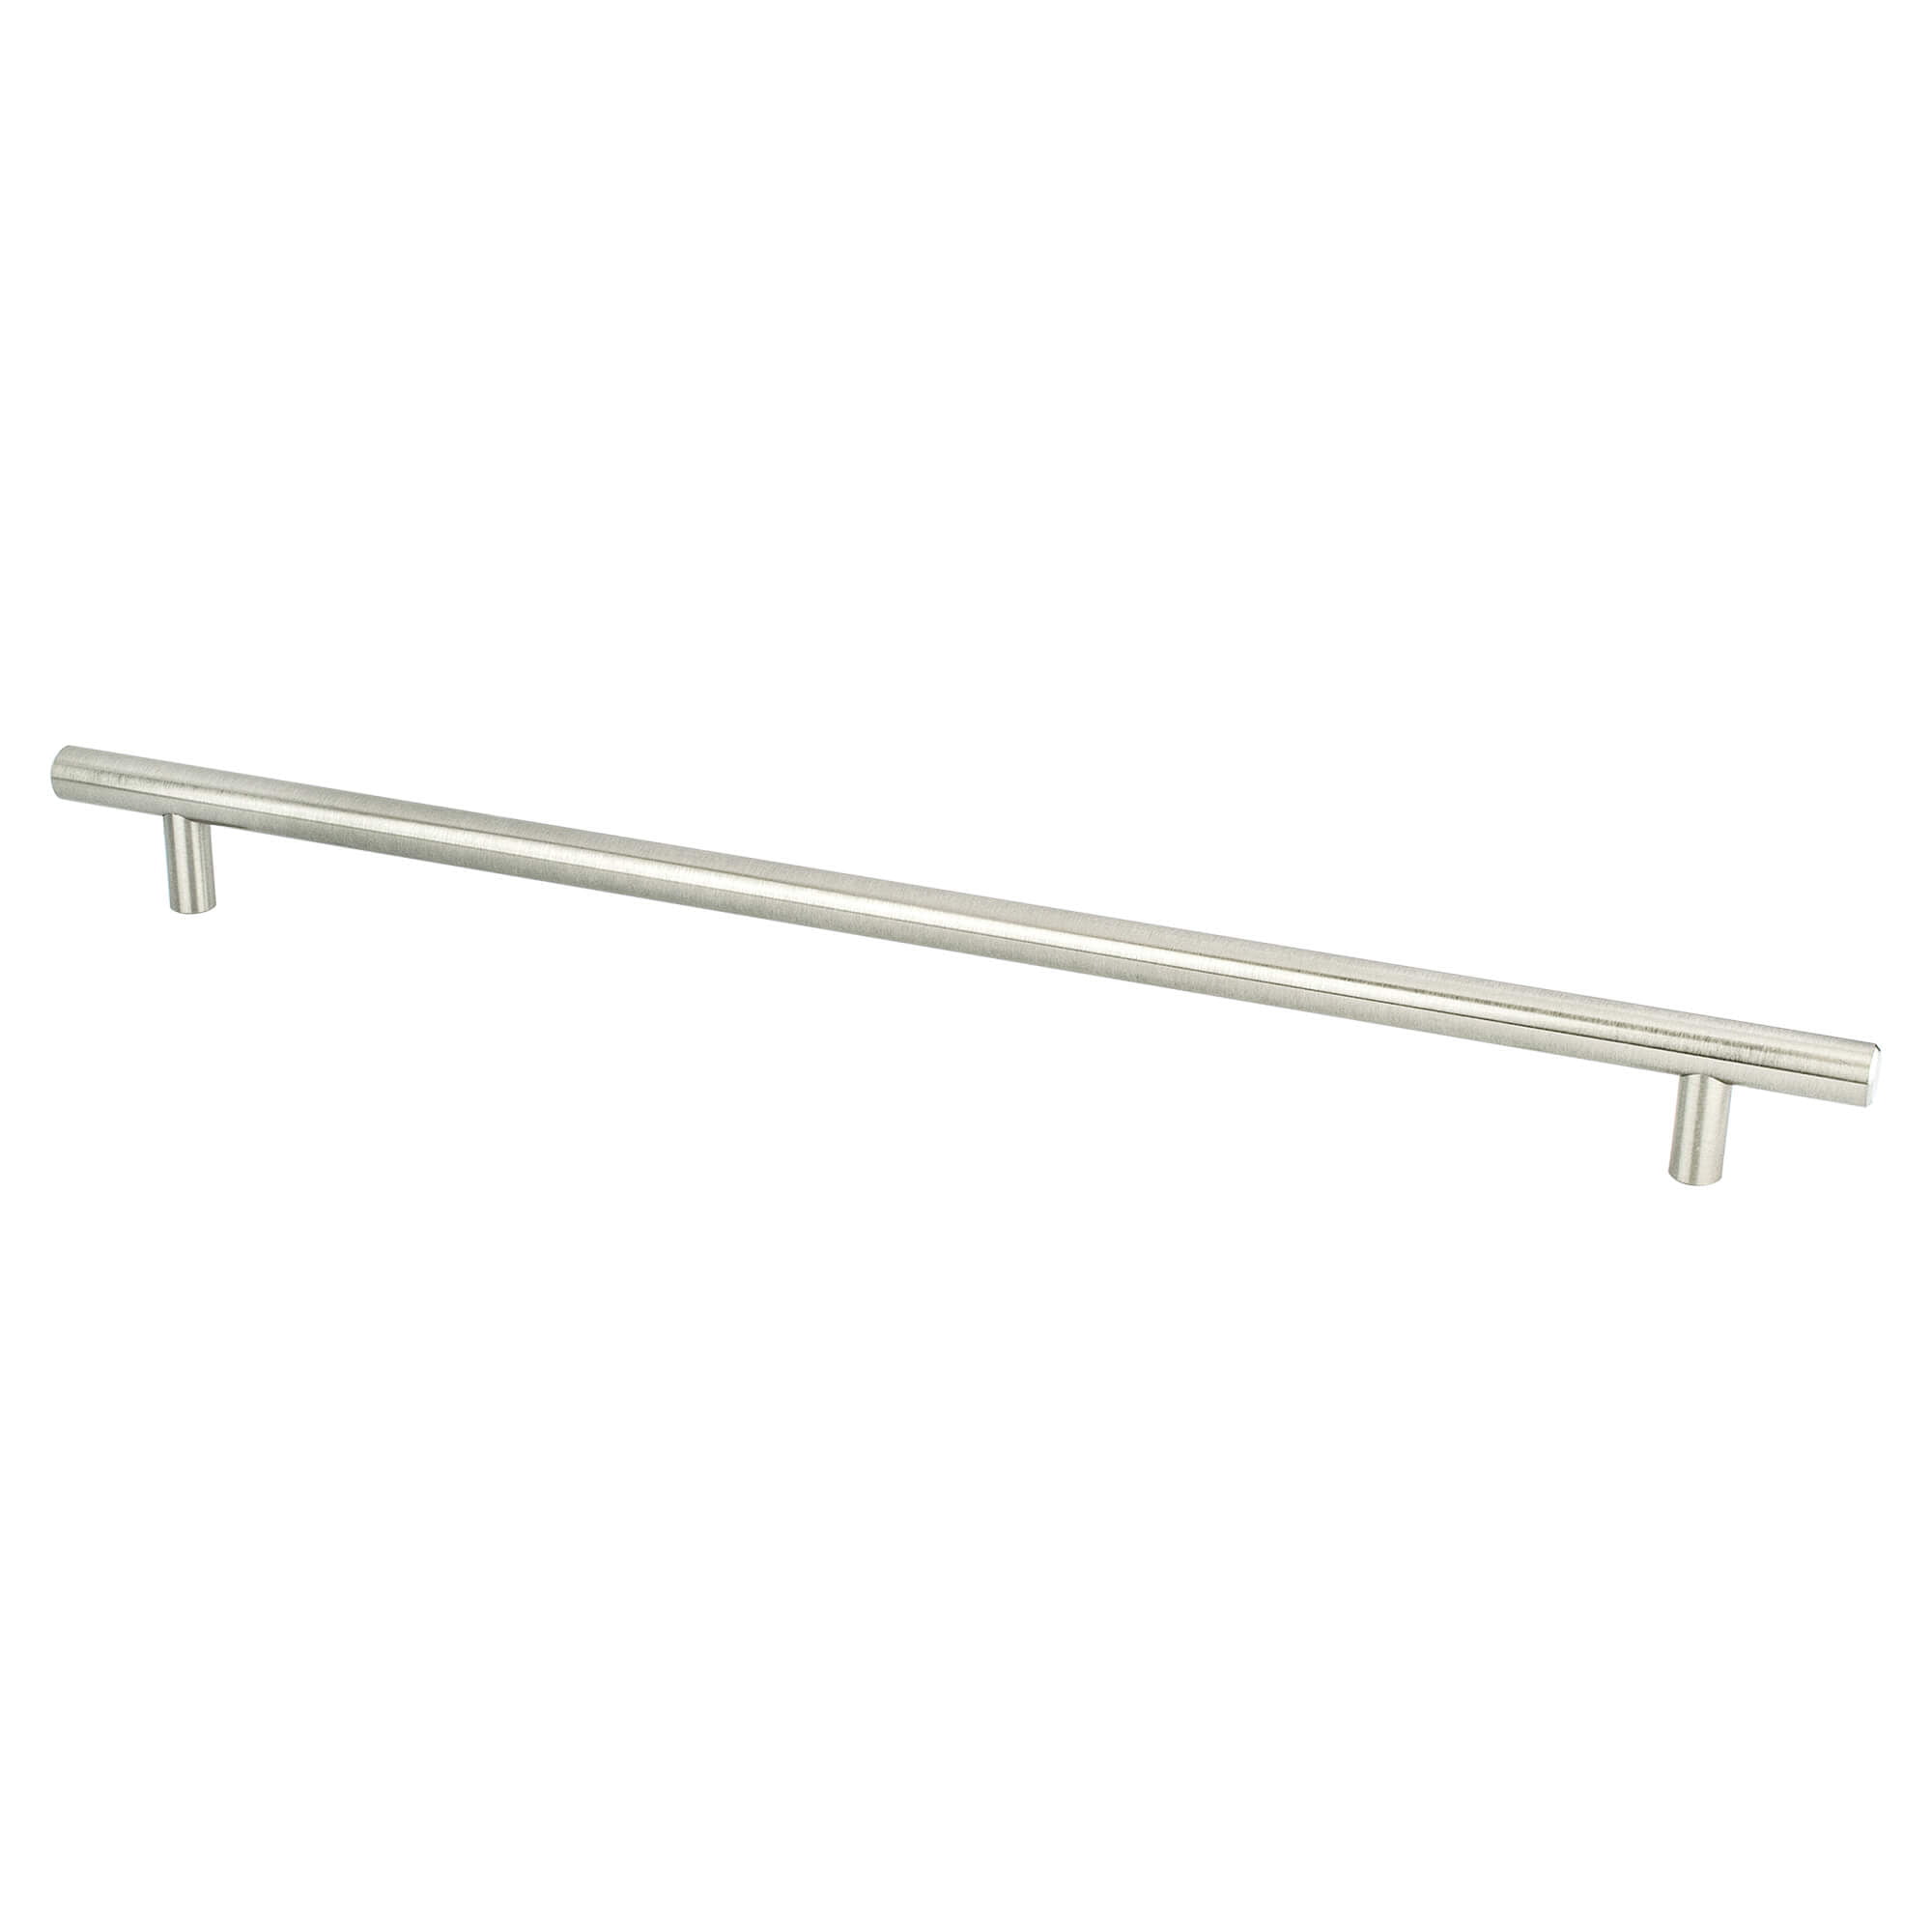 0810-2bpn-p 320 Mm Cc Tempo Pull With Brushed Nickel